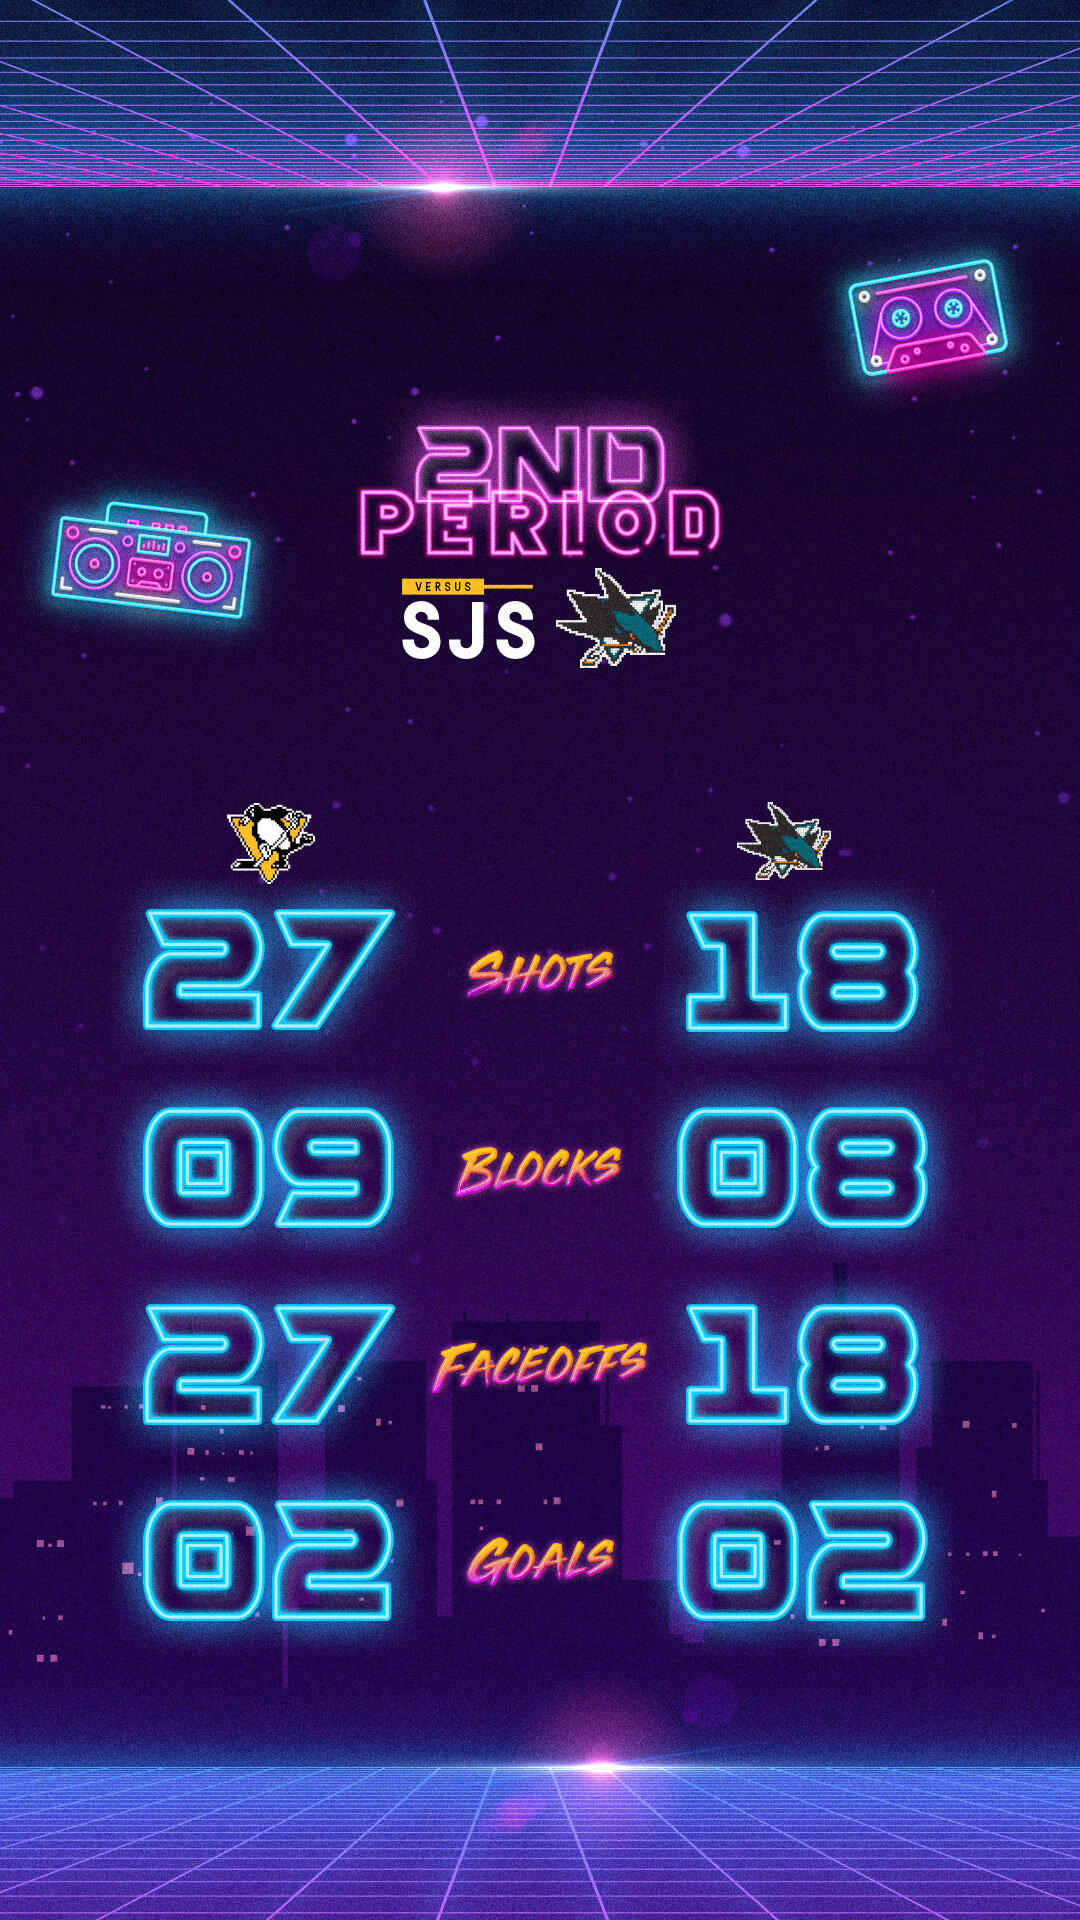 '80s Night 2nd Period Stats Graphic